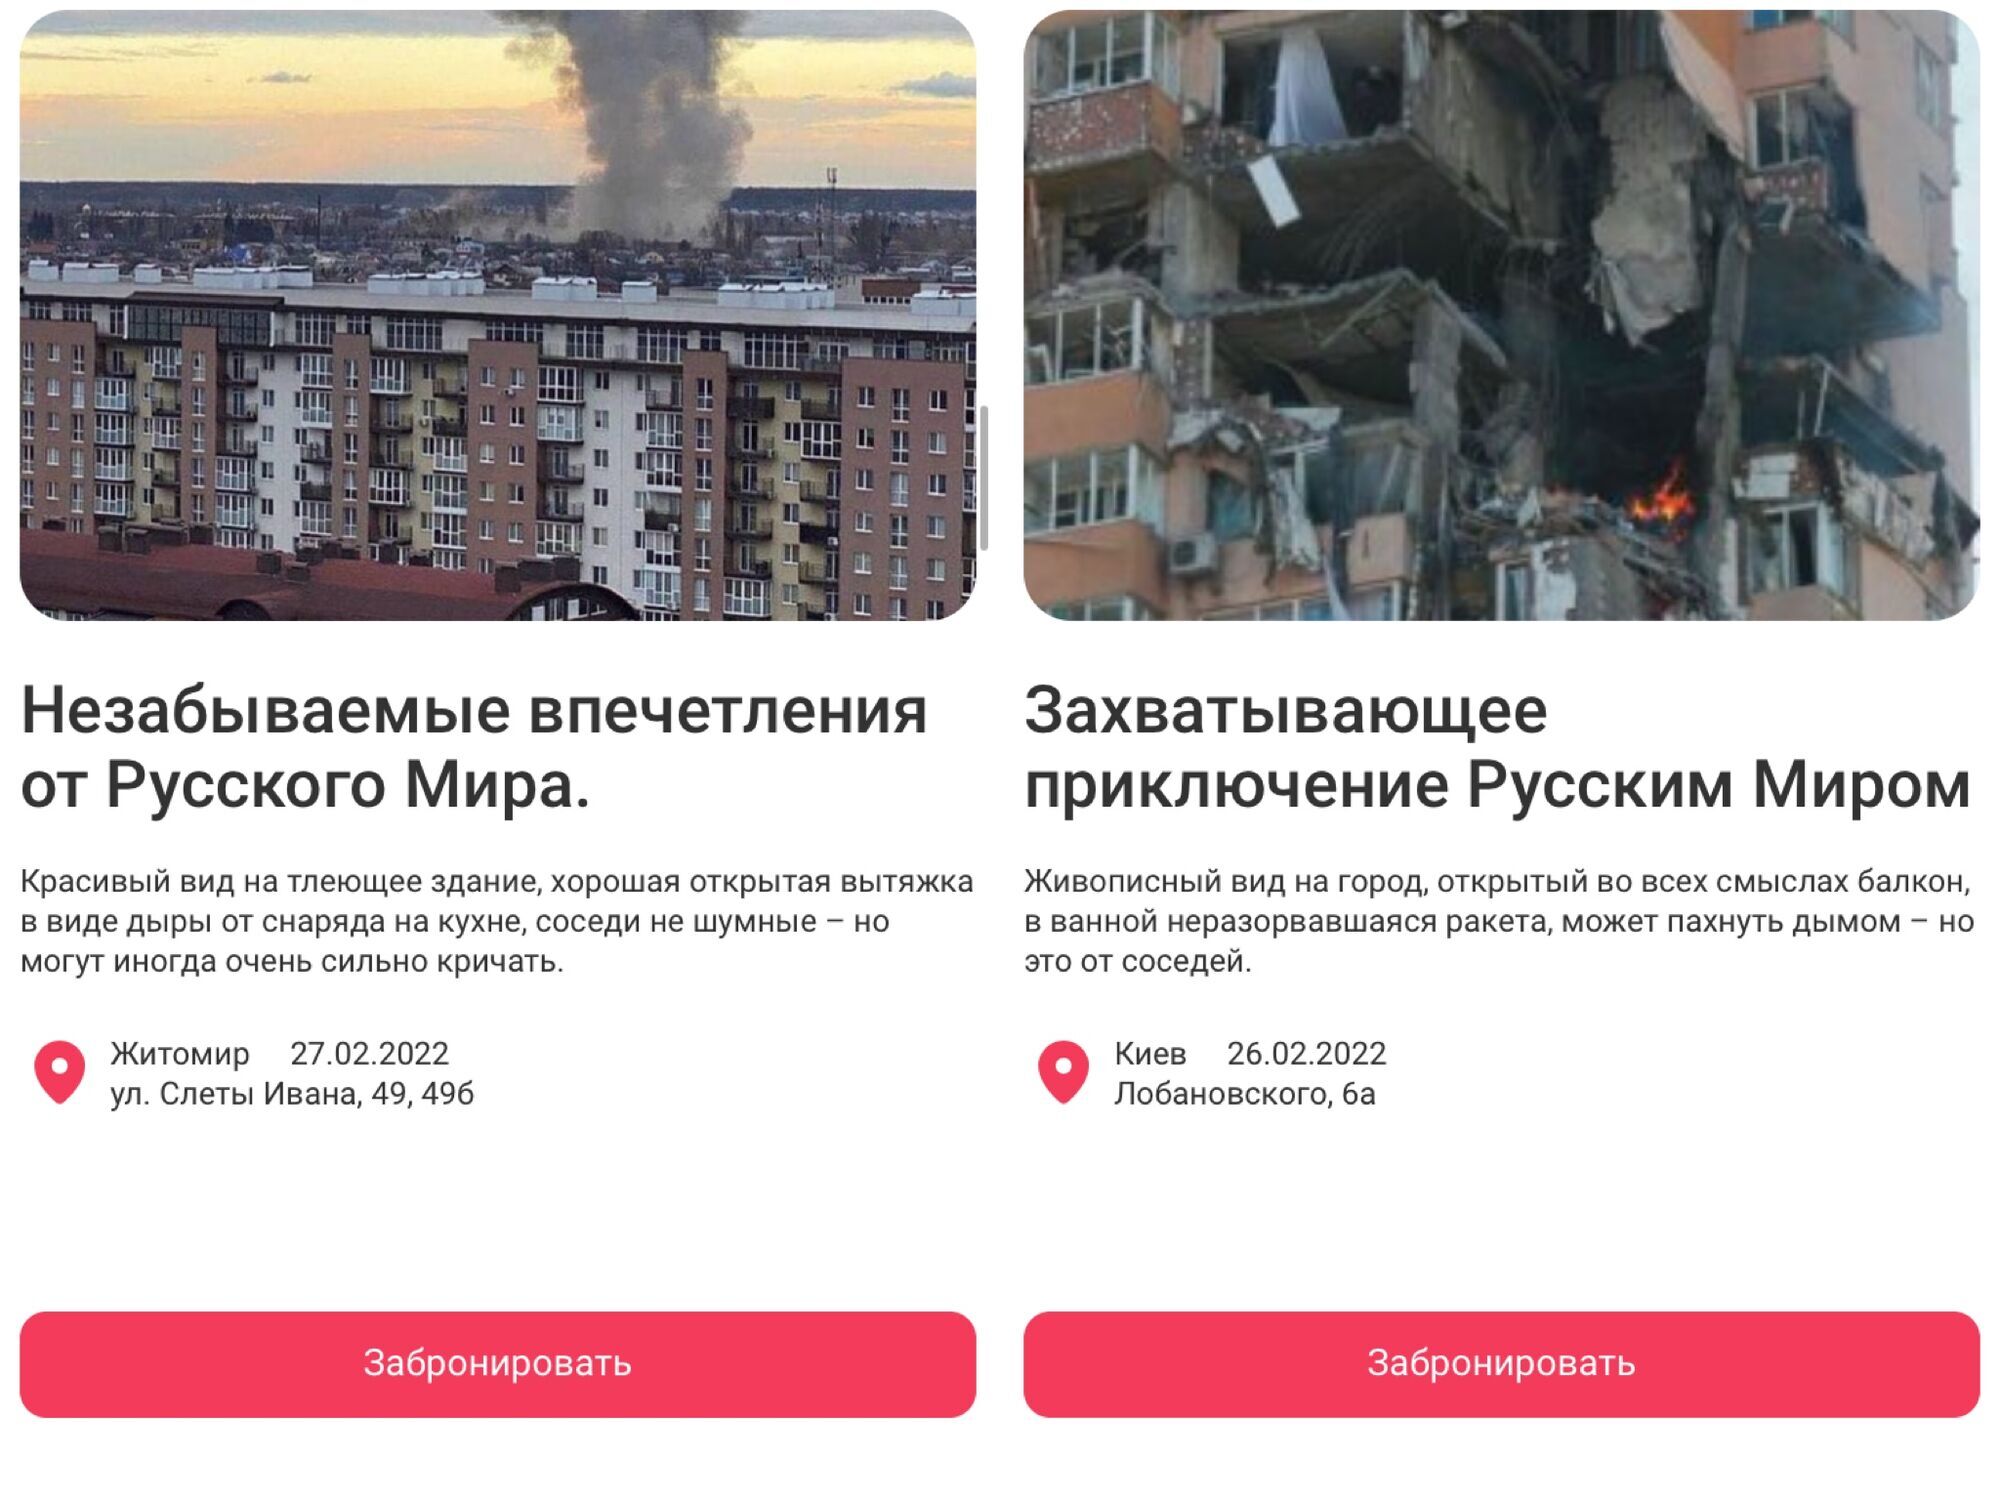 Airbnb russian edition